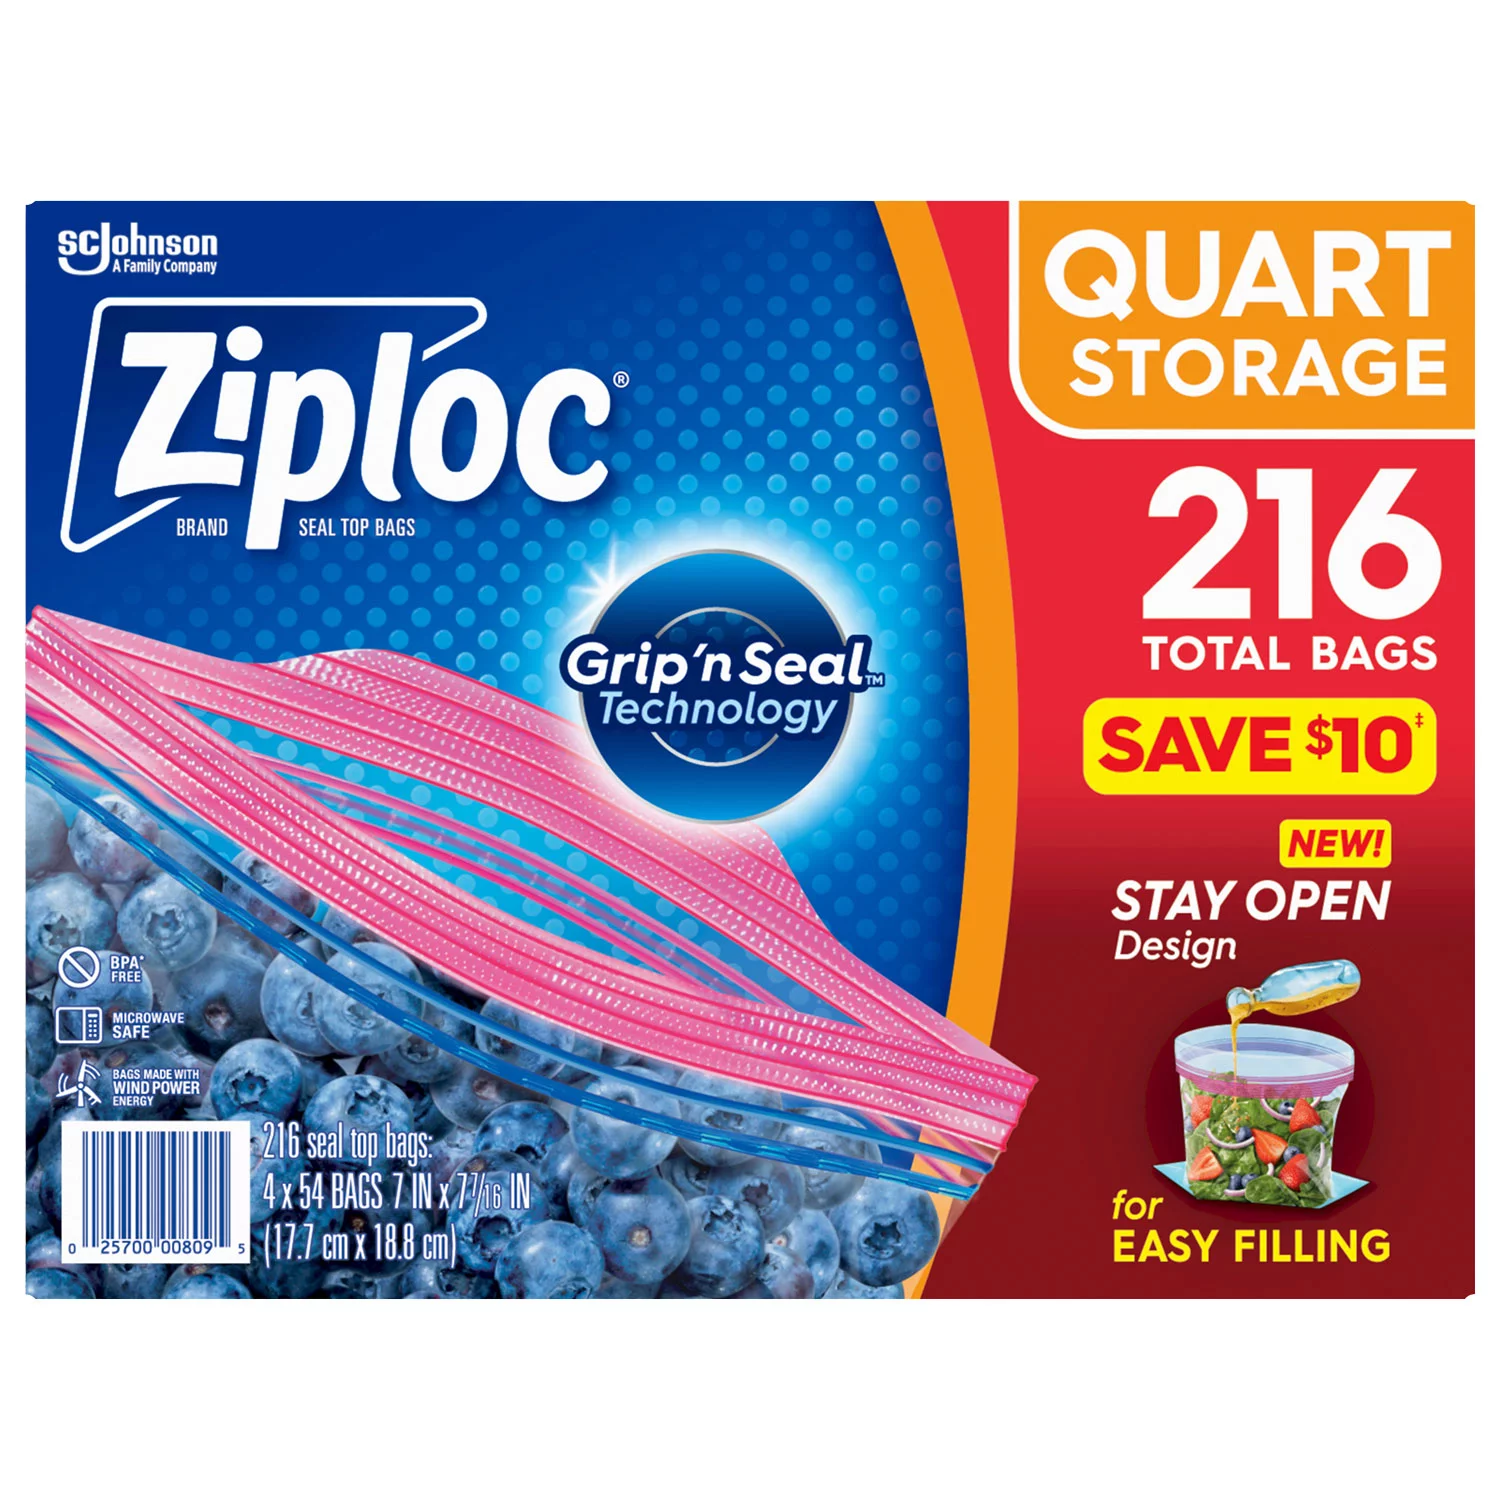 Ziploc Storage Quart Bags with Grip ‘n Seal Technology (216 ct.)